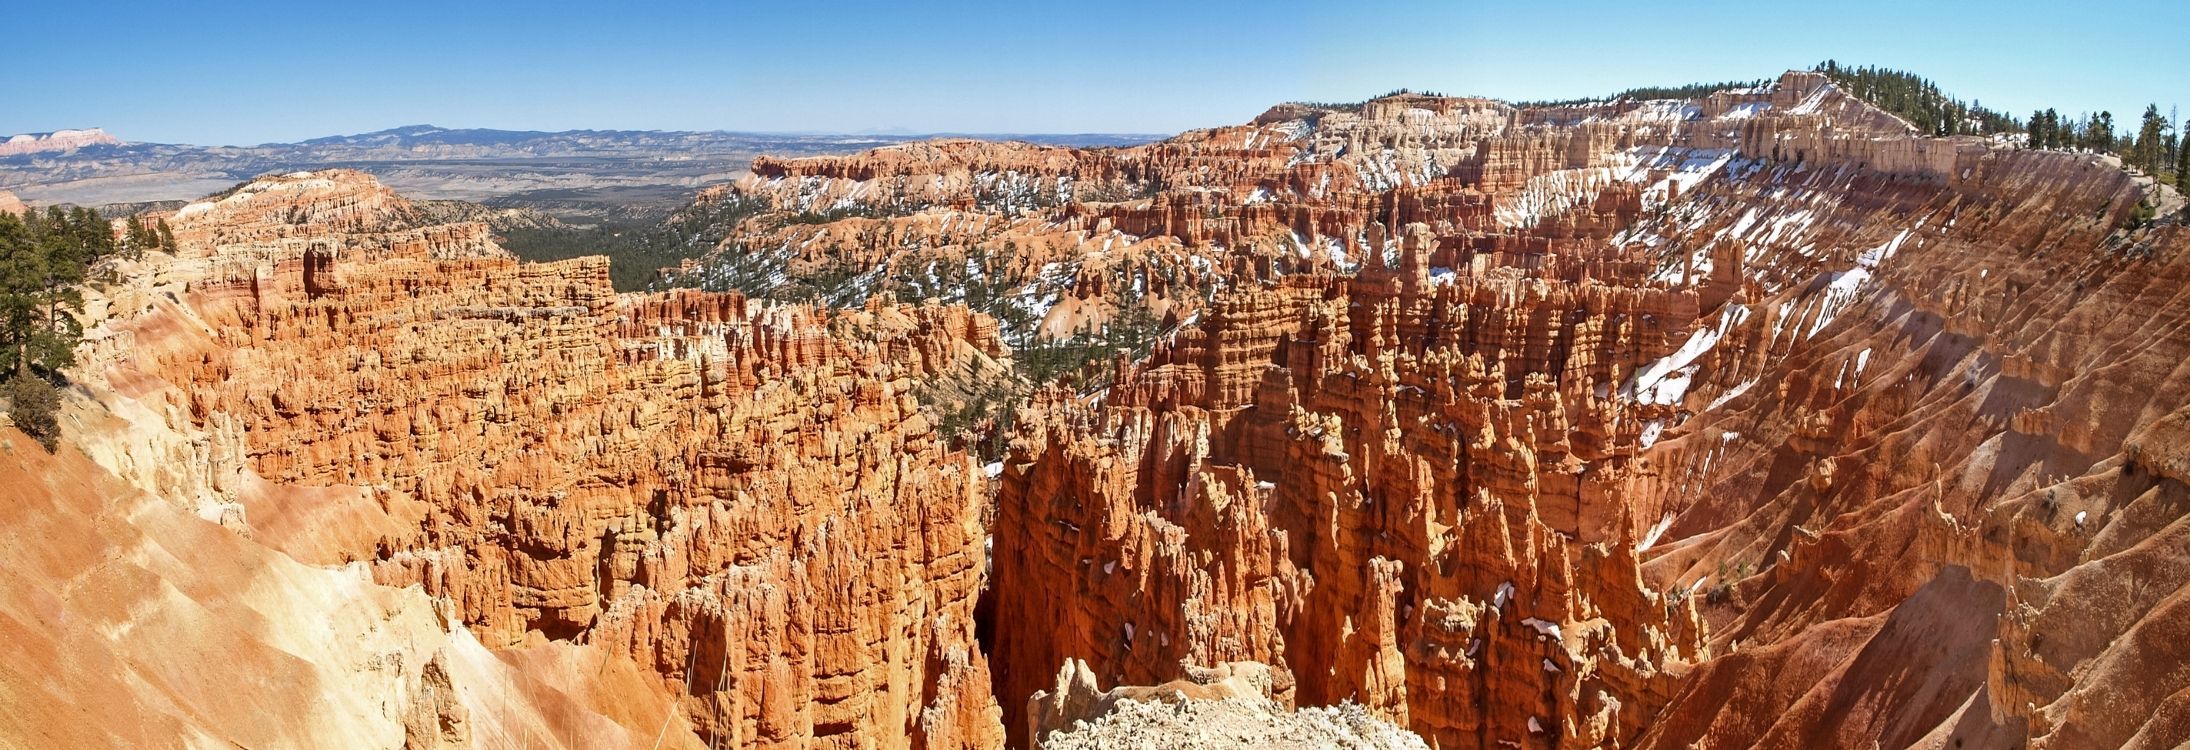 Bryce Canyon National Park, United States of America